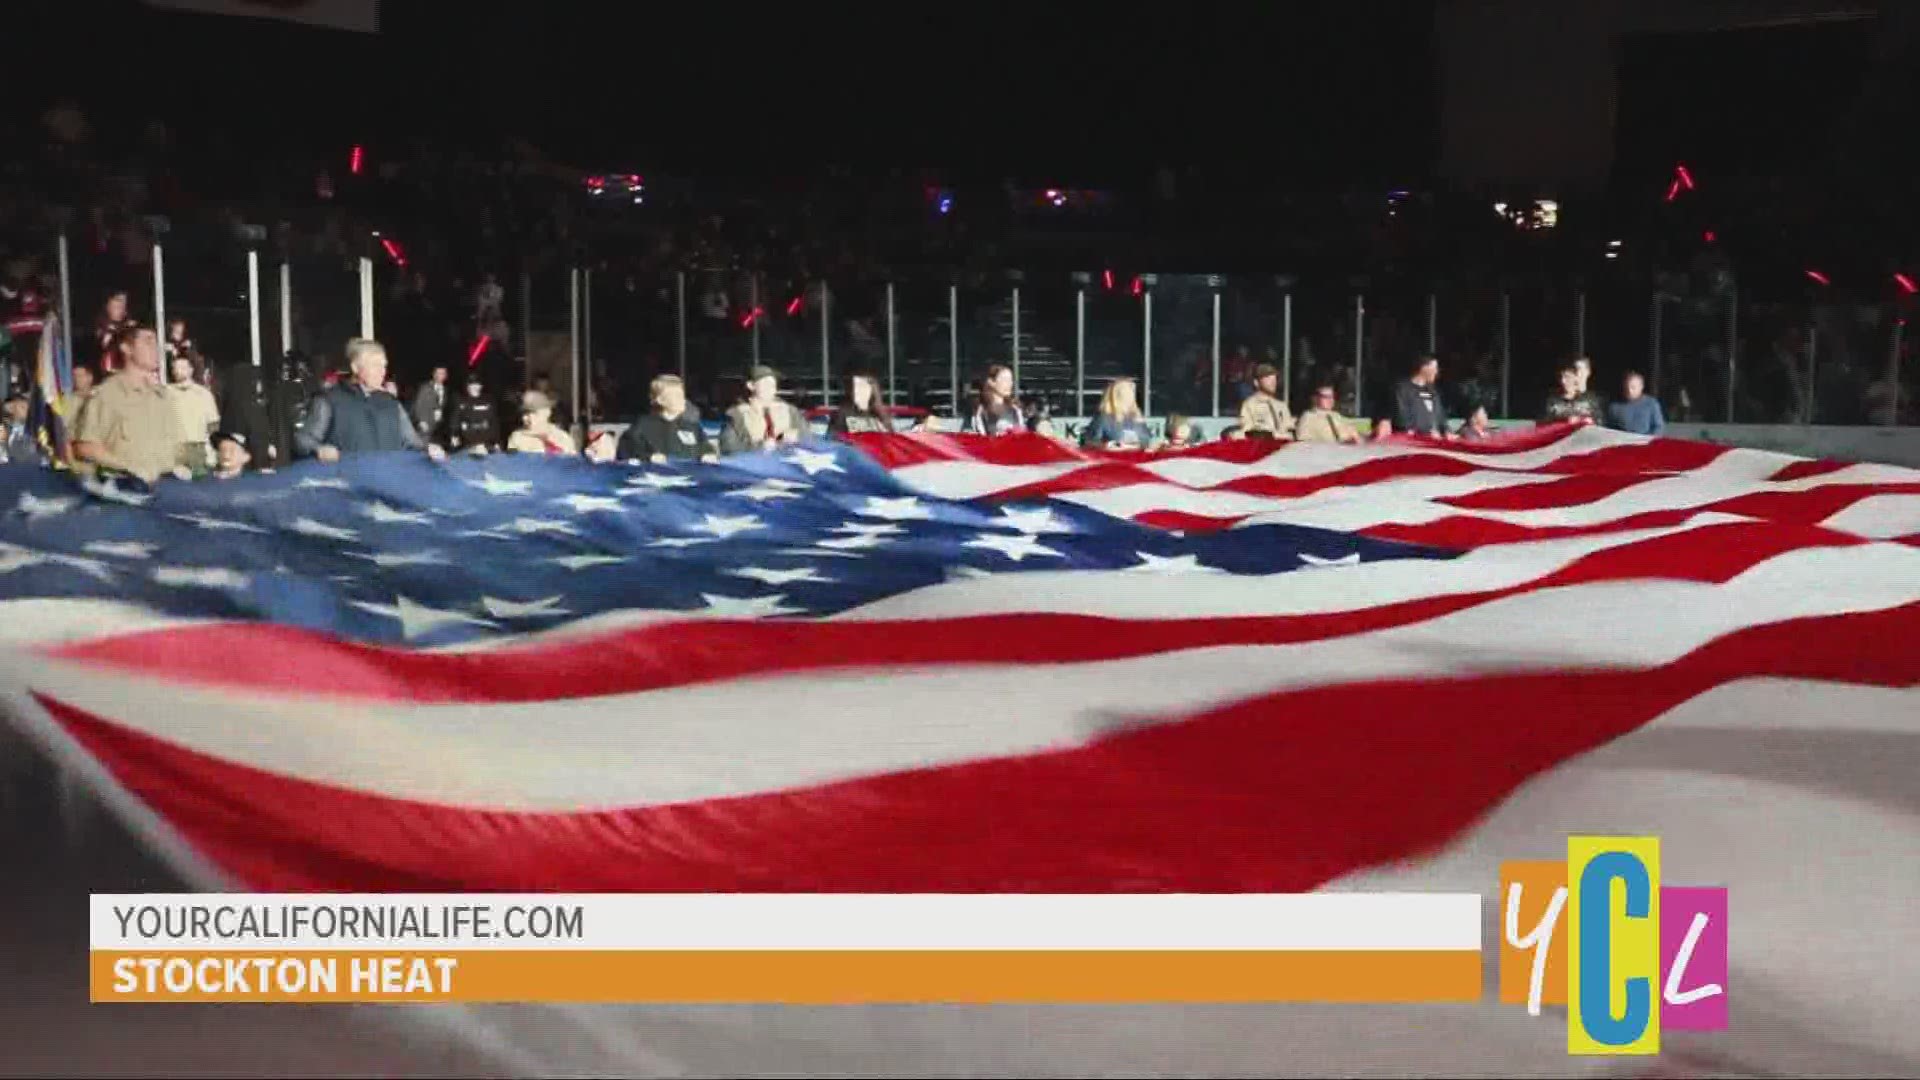 Find out what will the Stockton Heat has planned for military members.